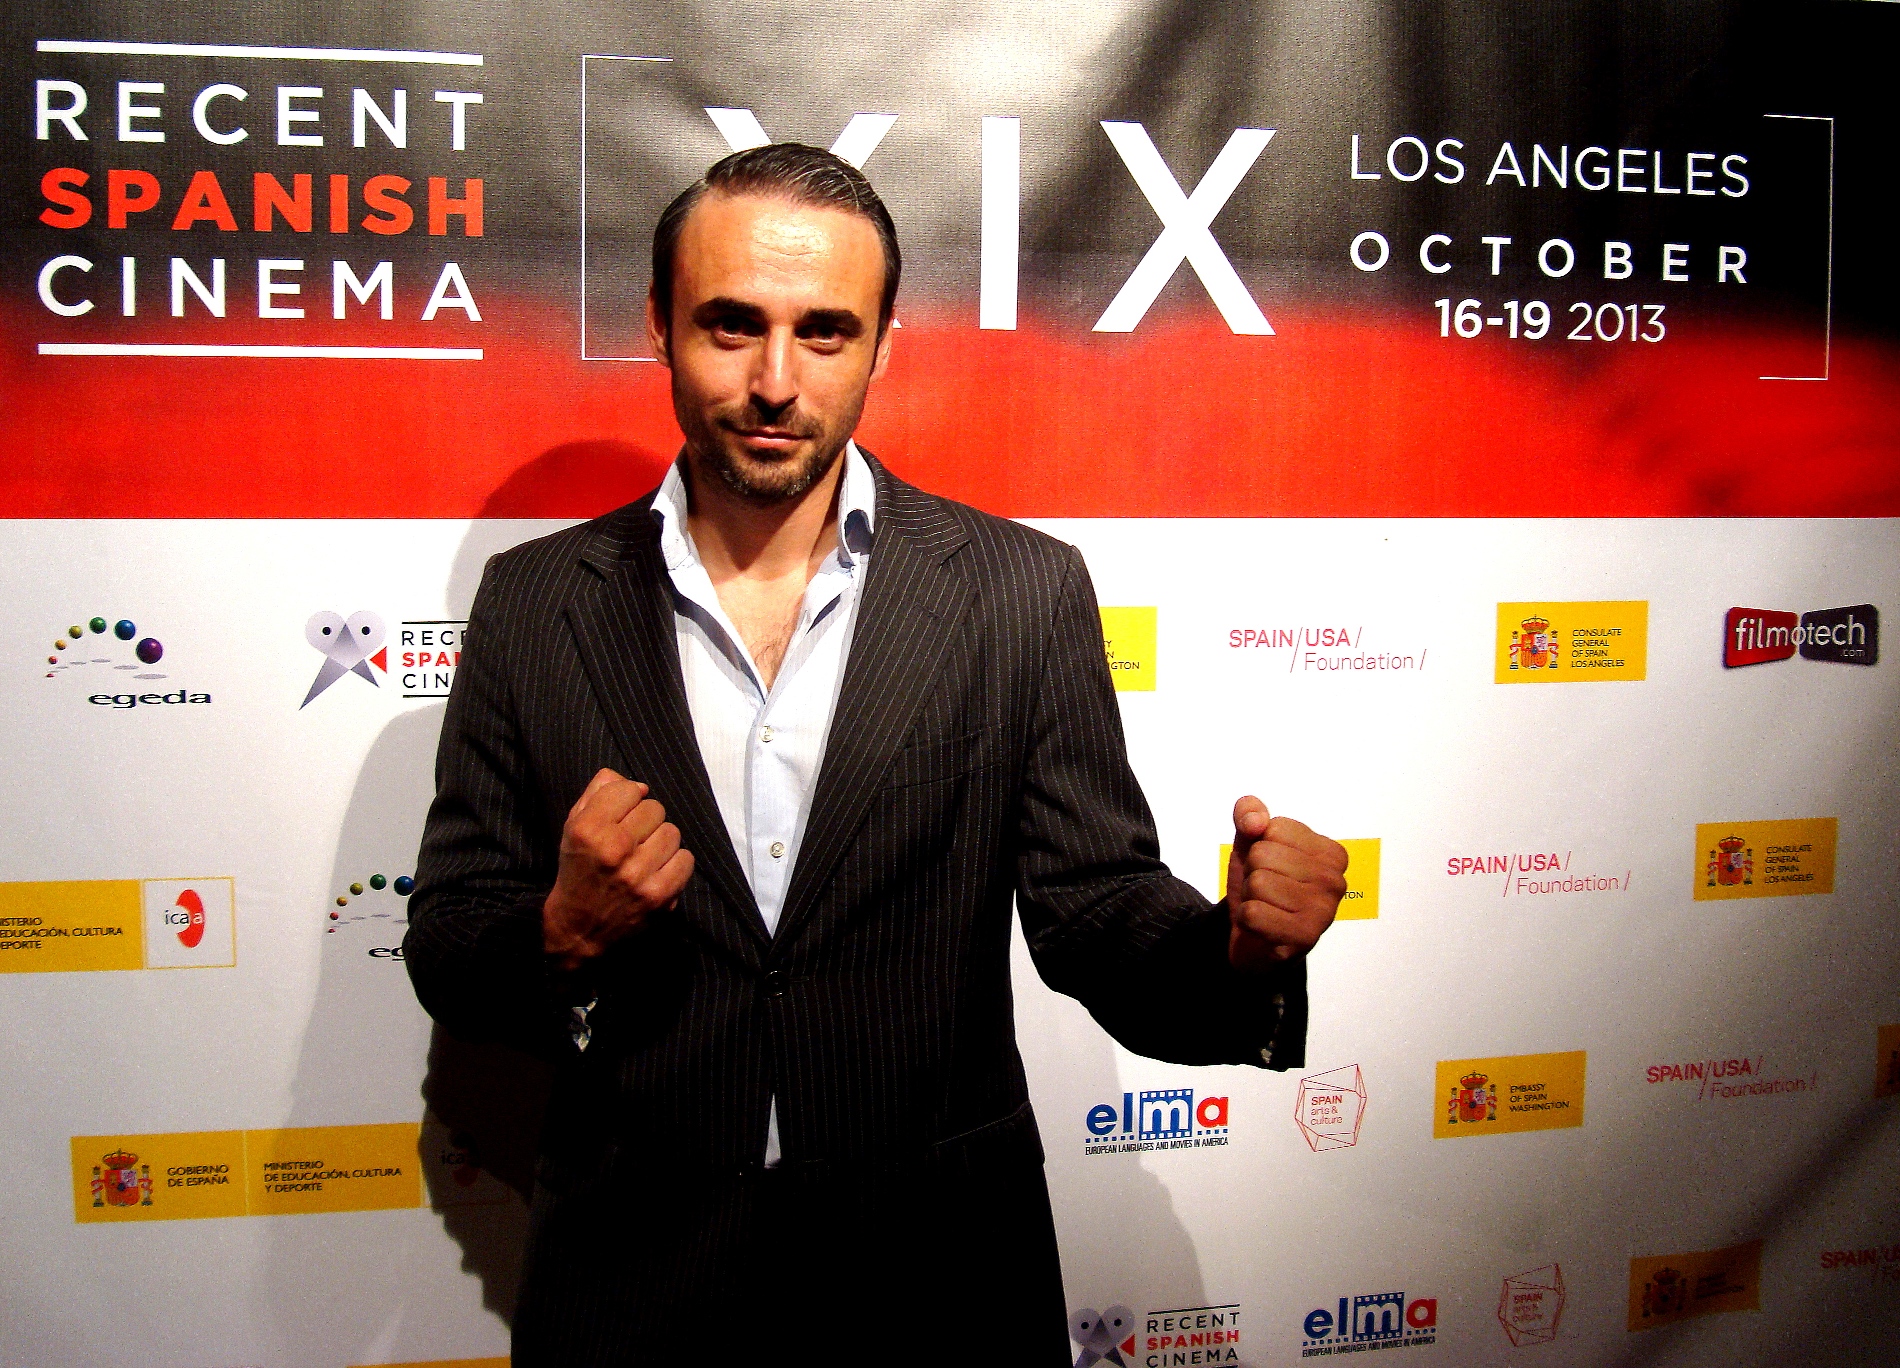 My MY FIRST HOLLYWOOD RED CARPET AT XIX SPANISH FILM FEST IN LA. ALTOUGH I HAVE A DIFFERENT WAY:I´M DOING AMERICAN MOVIES IN ENGLISH. DON´T TRY TO BE OTHER PERSON, JUST BE THE BEST YOU POSSIBLE D.V.